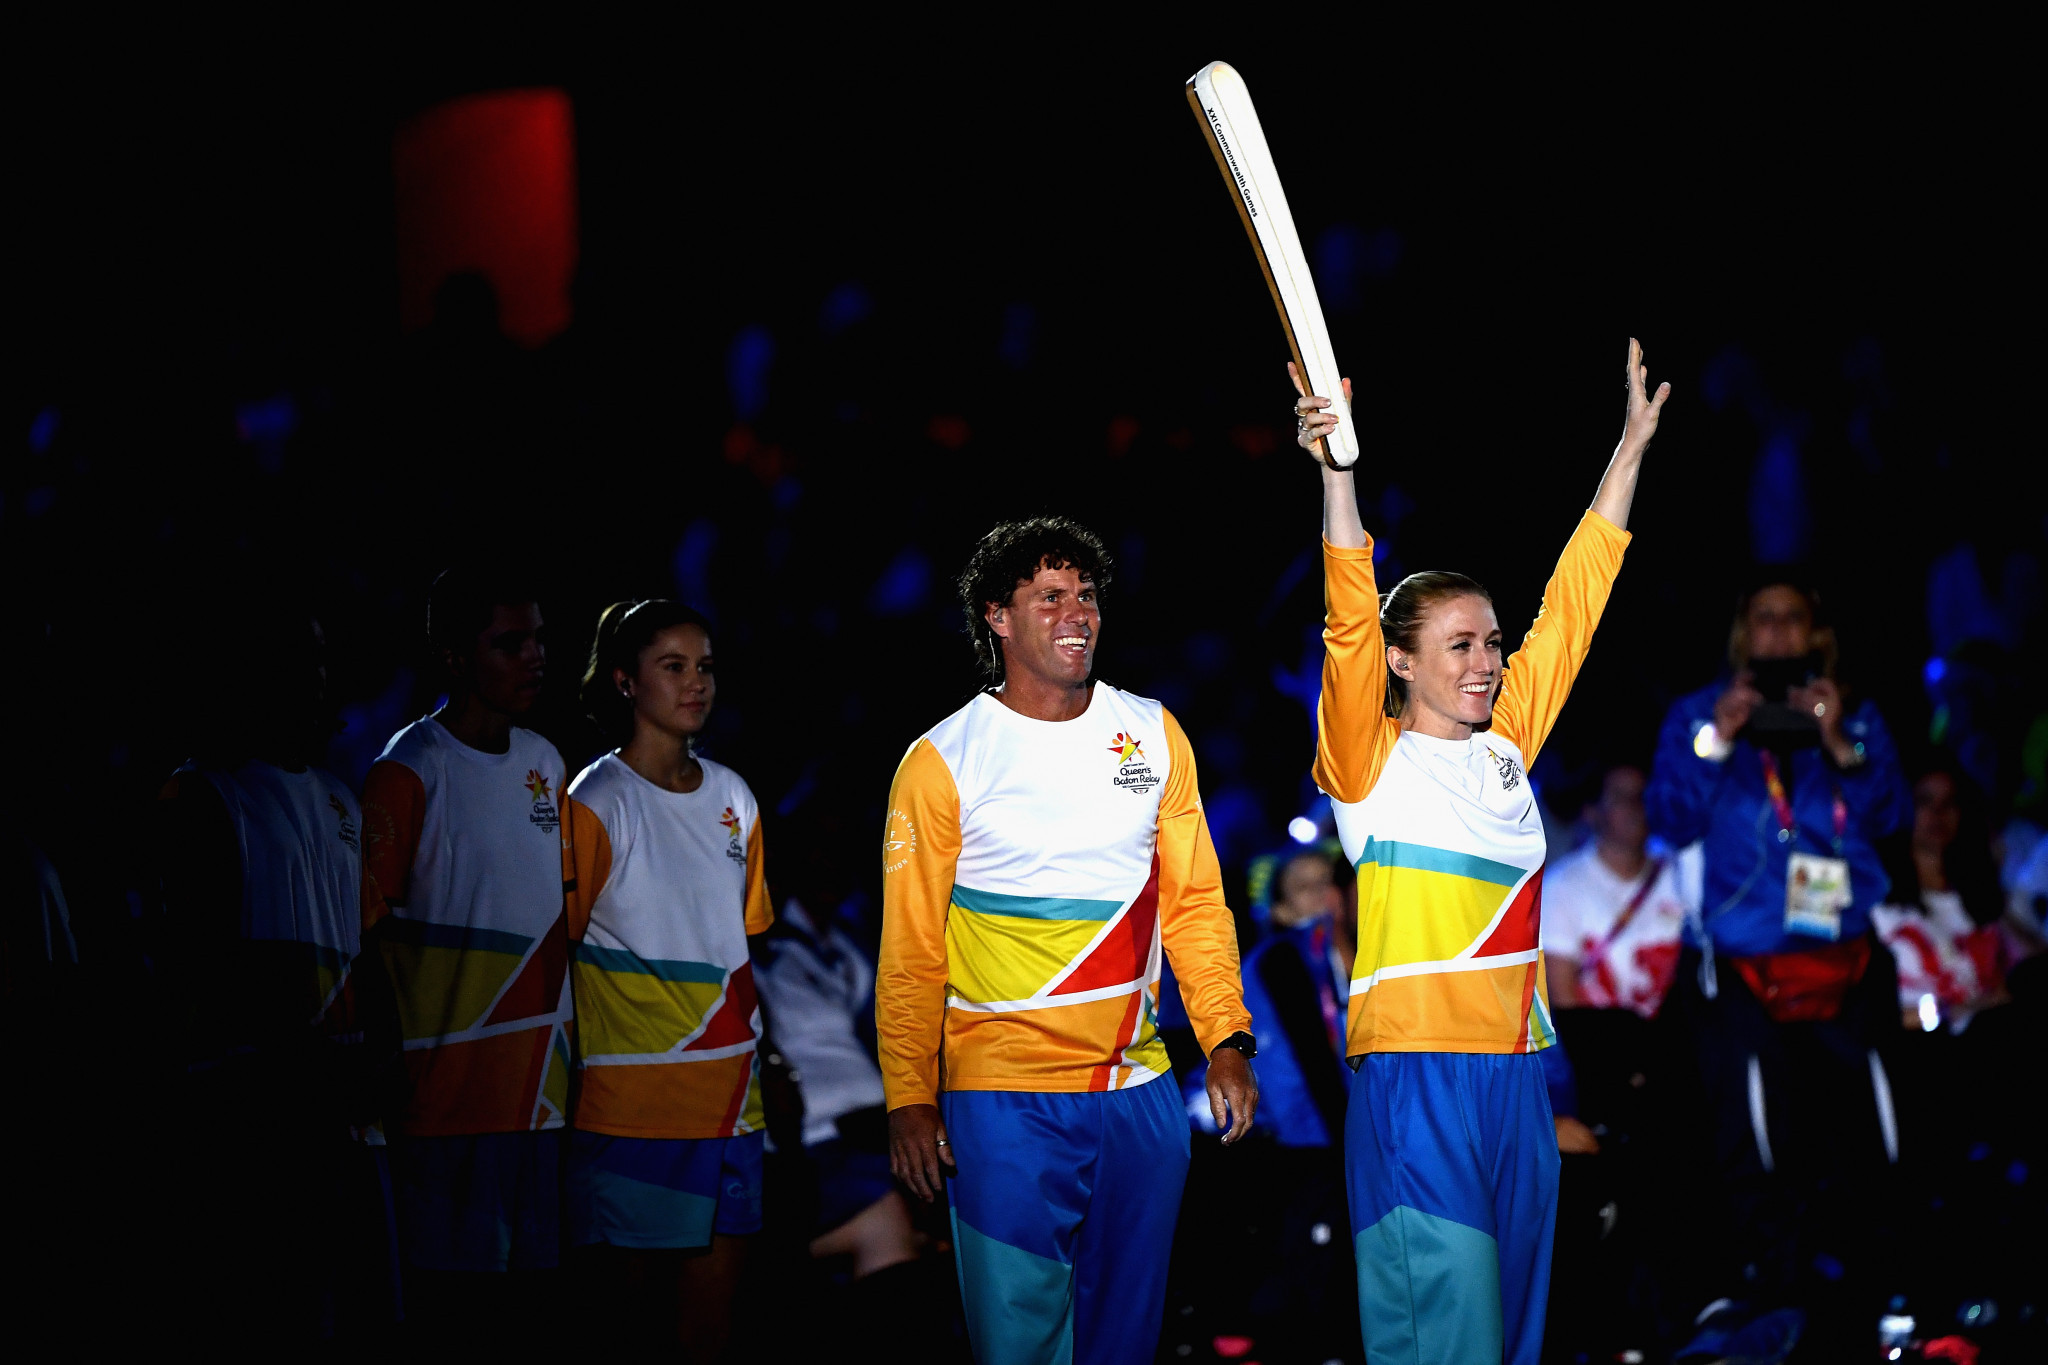 Sally Pearson carries The Queen's Baton during the Opening Ceremony for the Gold Coast 2018 Commonwealth Games ©Getty Images